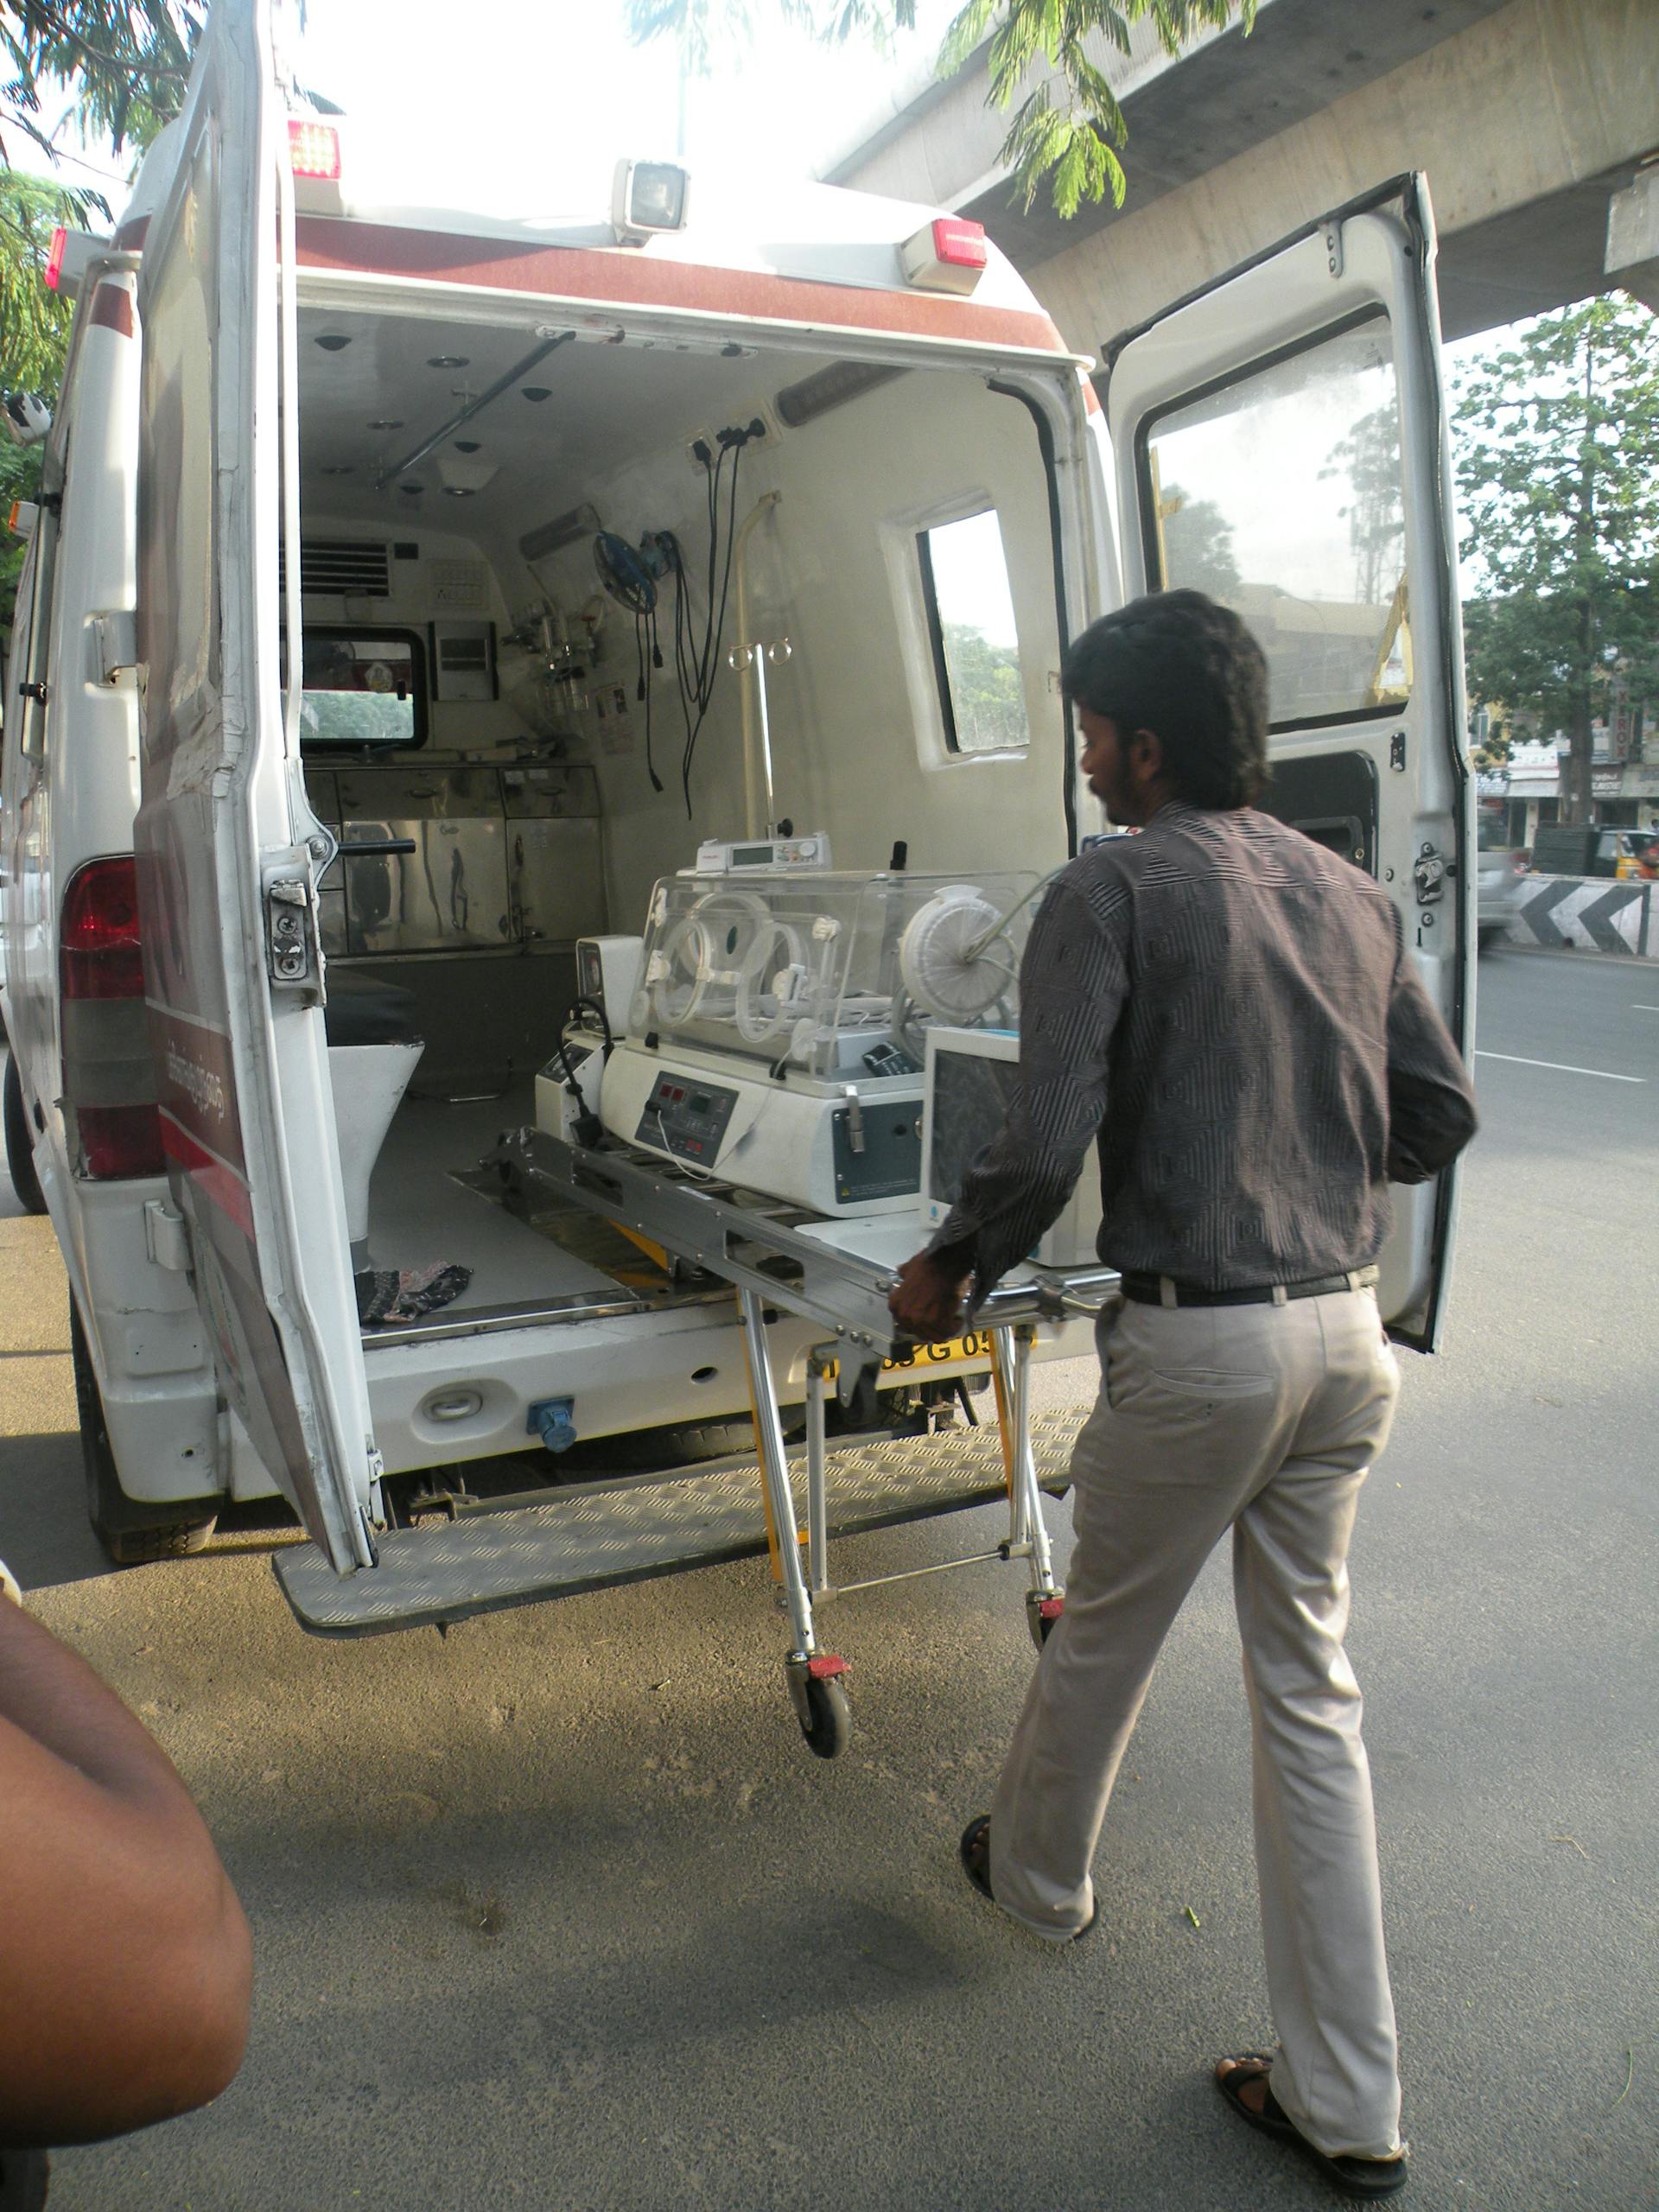 TINC 100 being placed with ease in an ambulance